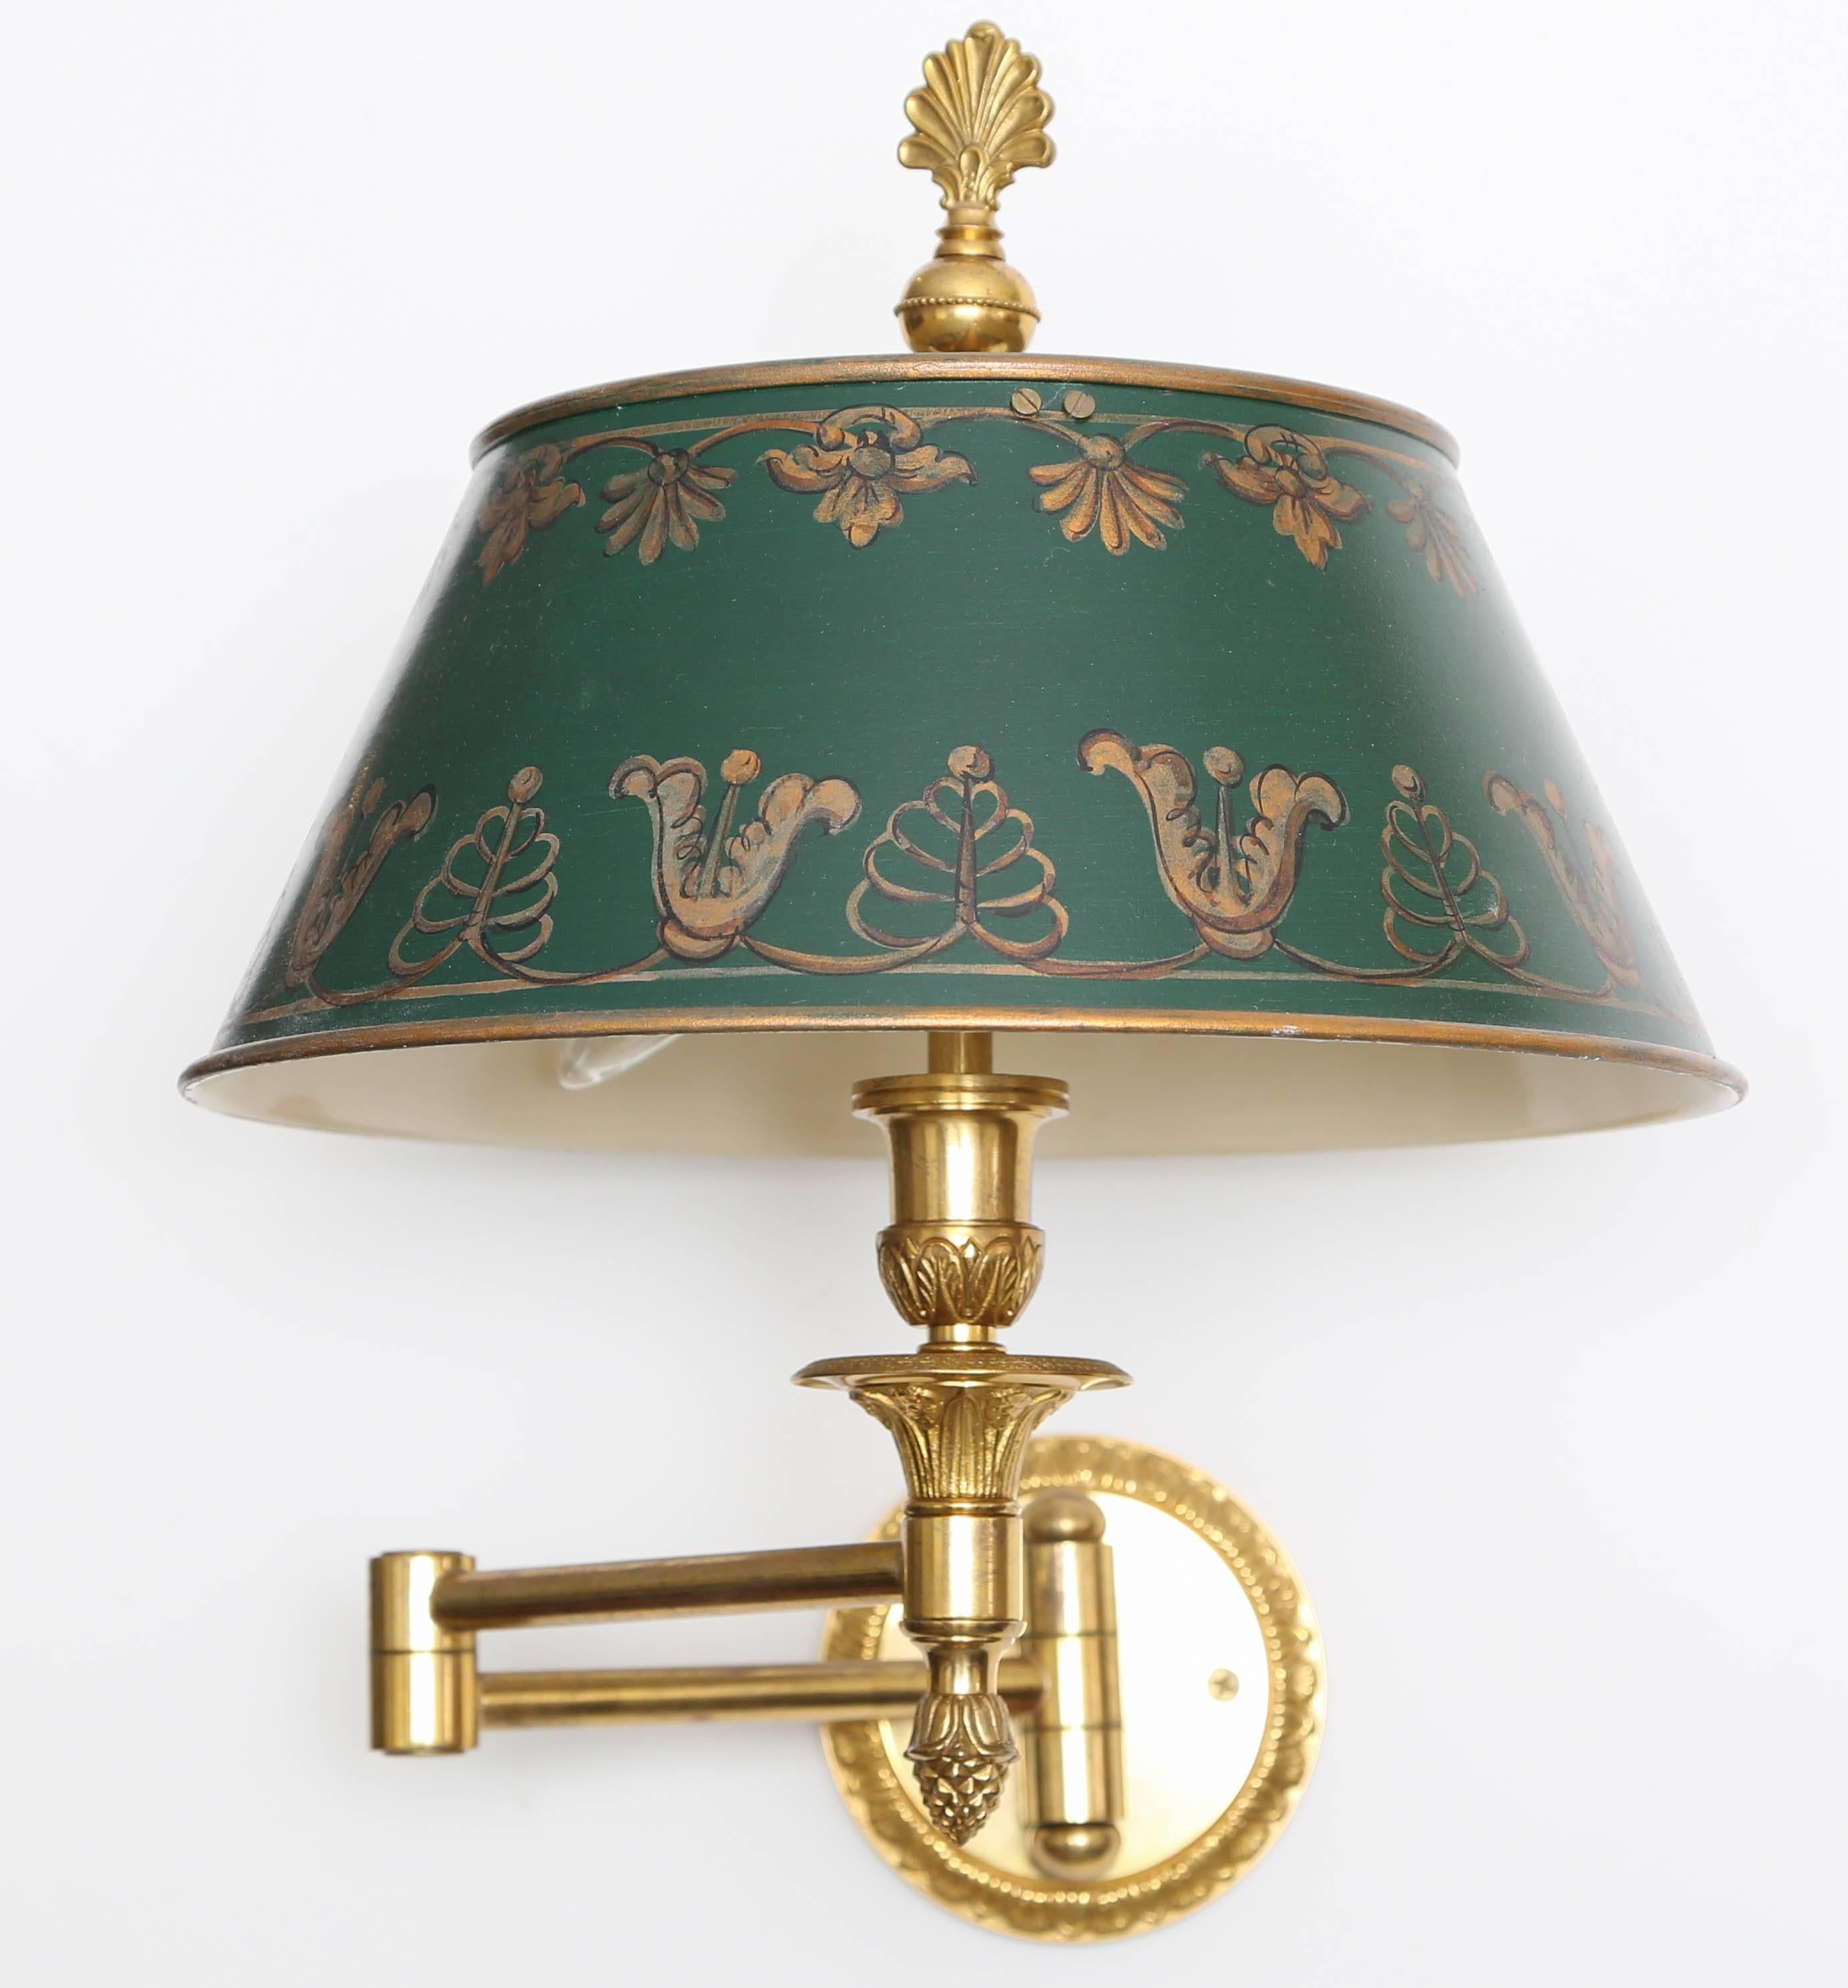 Solid brass dual swing arm sconces with hand-painted hunter green and gold tole shades.